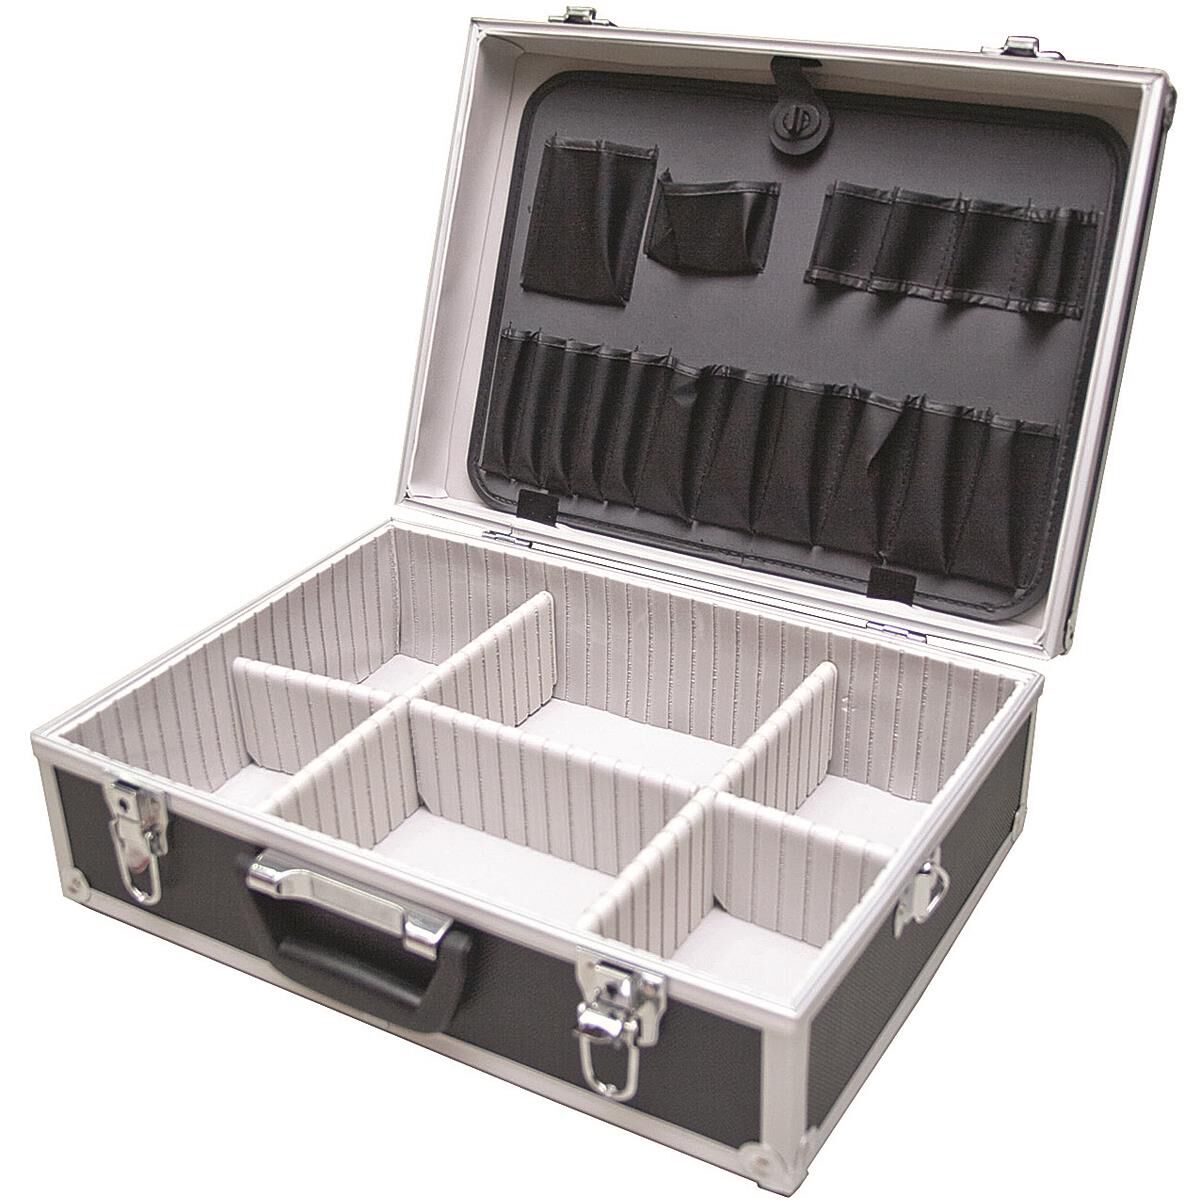 SET OF 3 STORAGE CASES BOXES CARRIER TOOLBOX ALUMINUM CARRY BOX BRIEFCASE HOLDER 